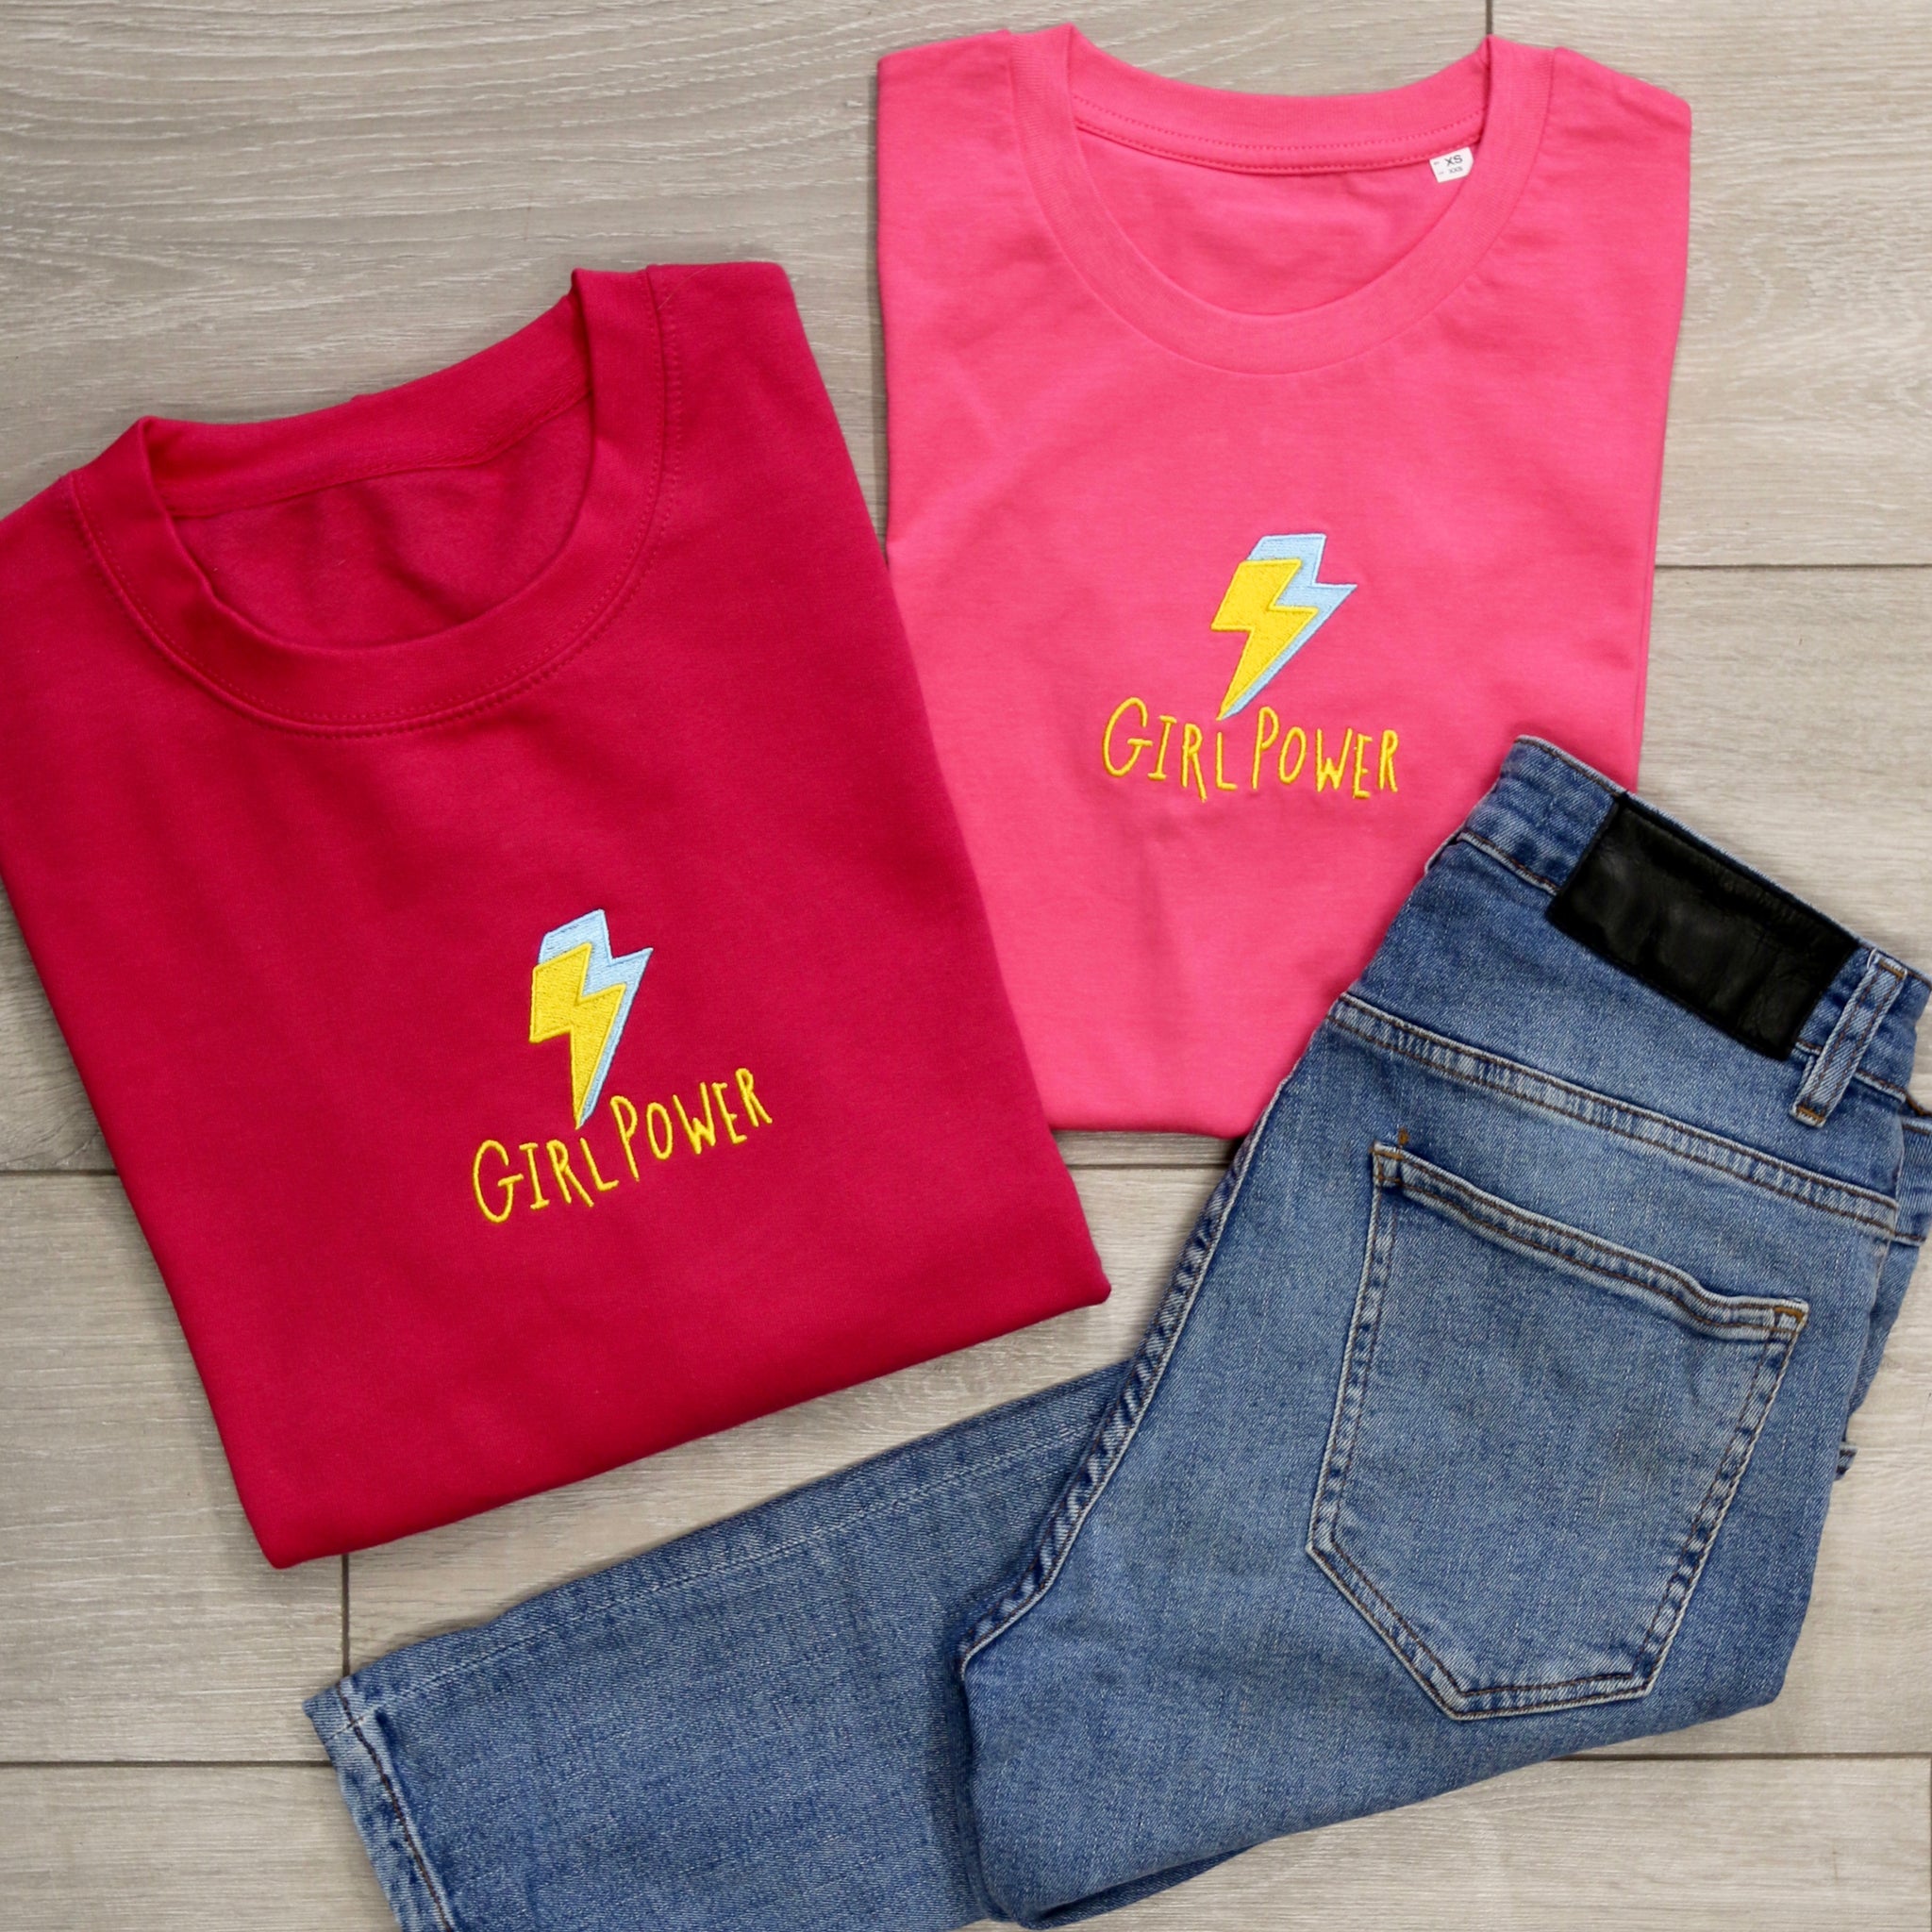 Girl Power Available in Adults and Kids